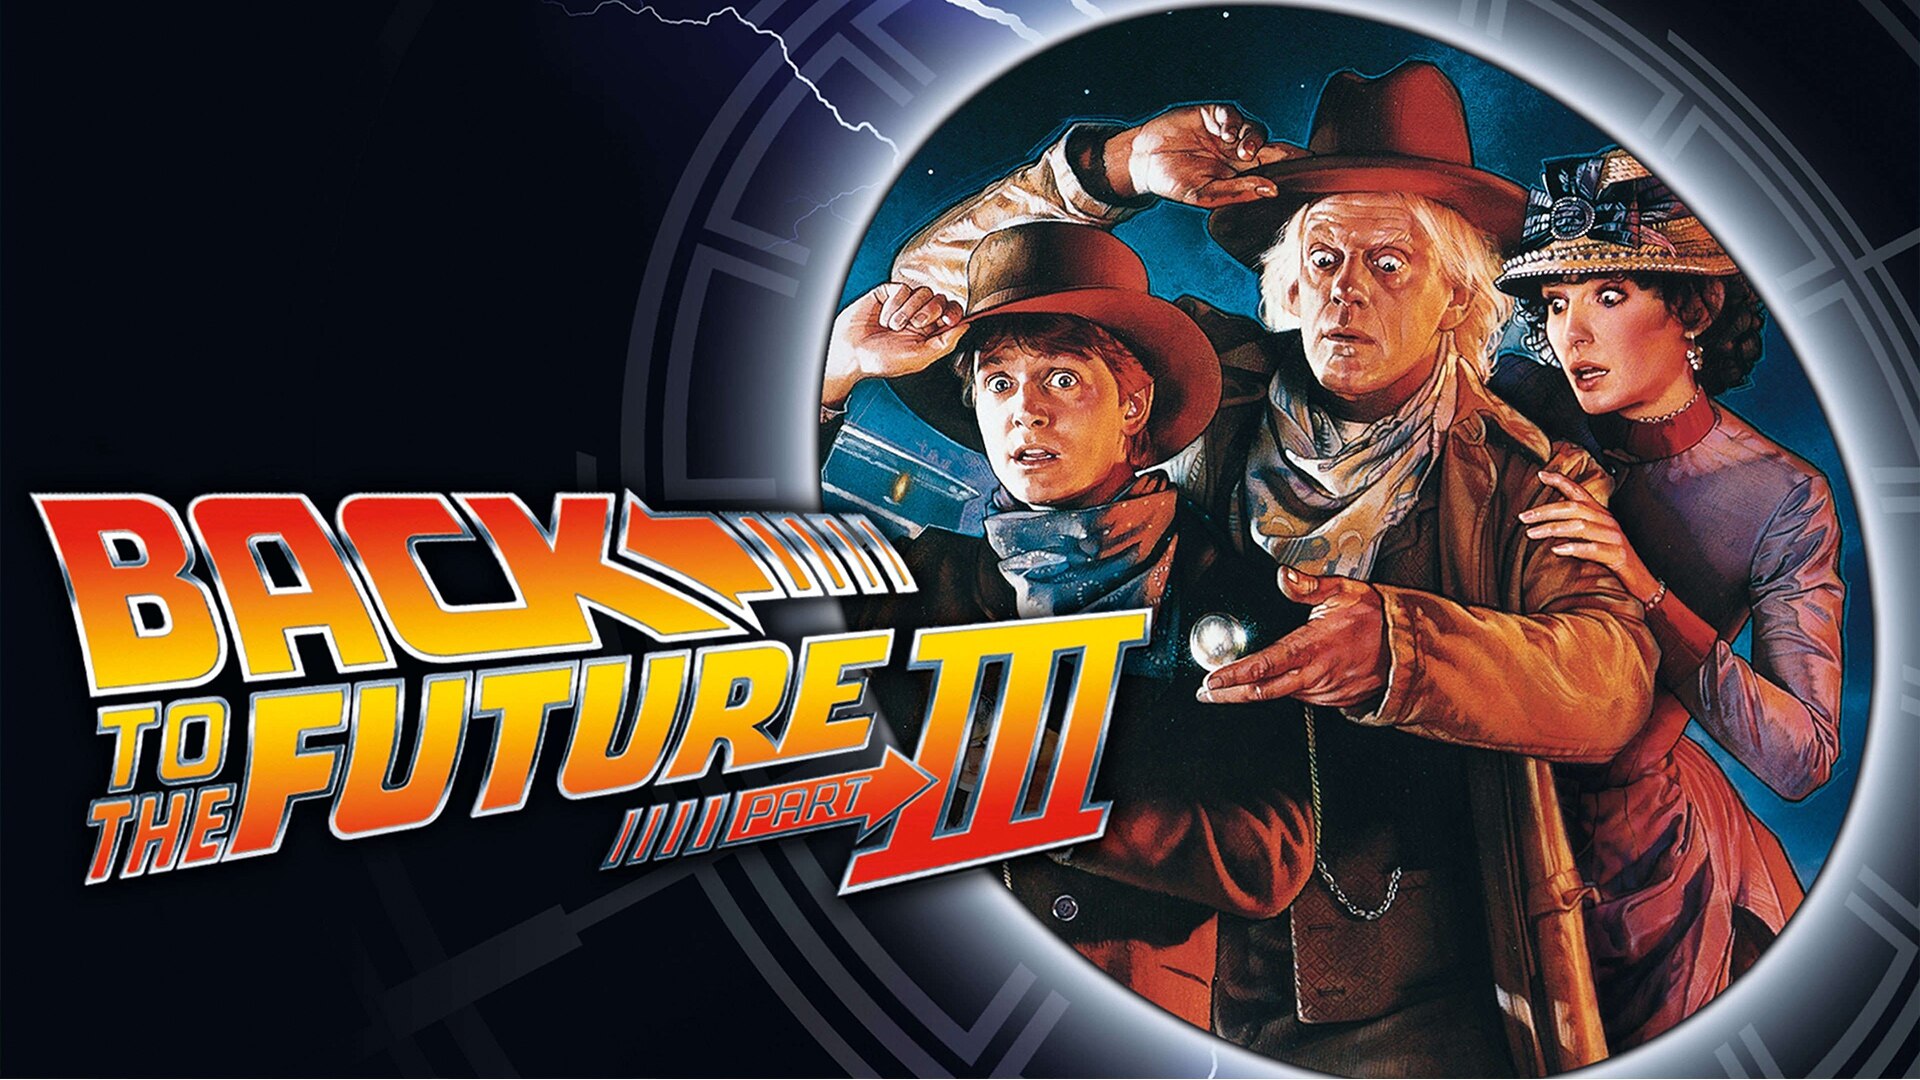 Back to the Future Part II' button